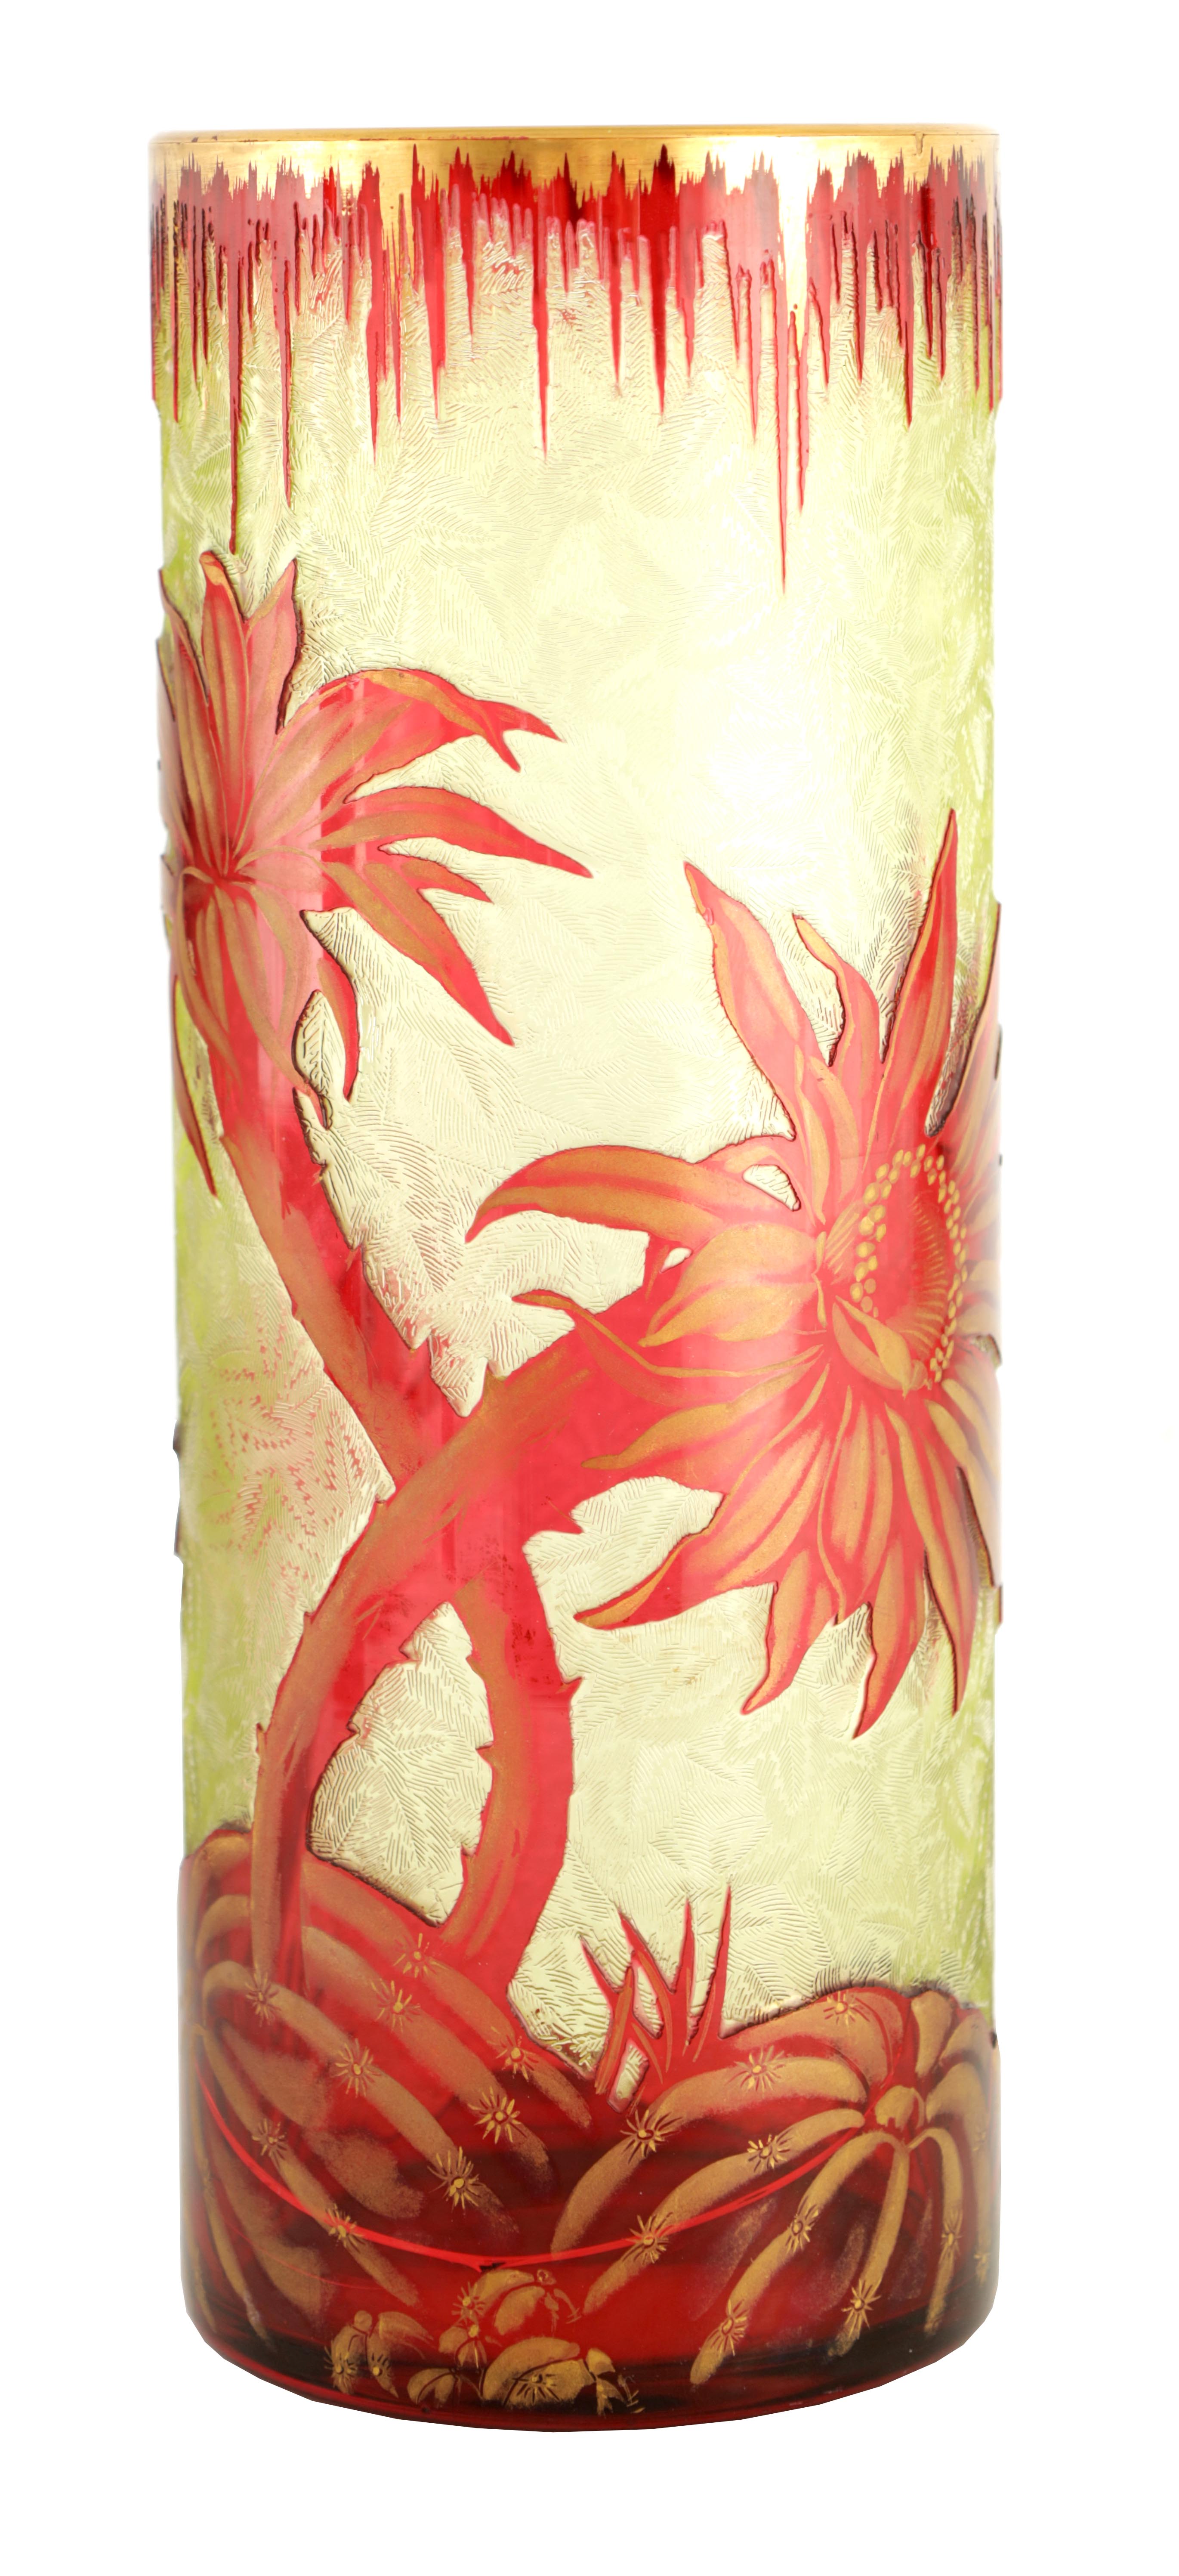 A STYLISH 20TH CENTURY BACCARAT GLASS ETCHED CYLINDRICAL VASE with acid-etched decoration